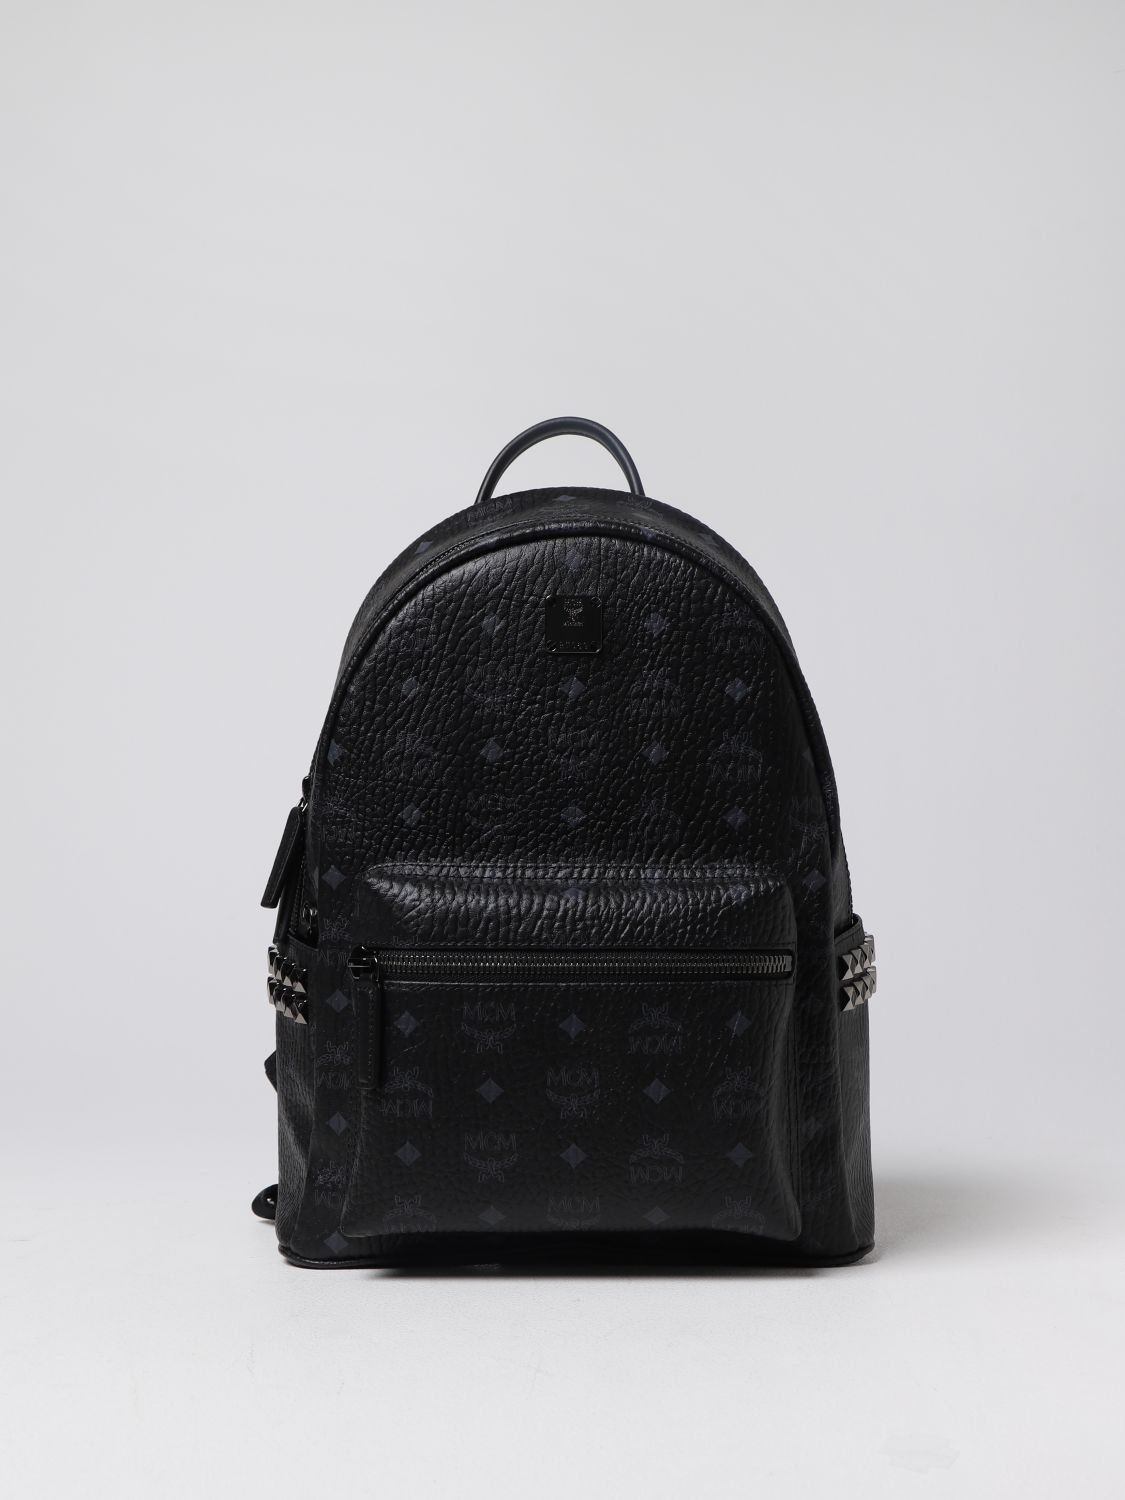 MCM, Bags, Authentic Mcm Black Leather Mini Backpack